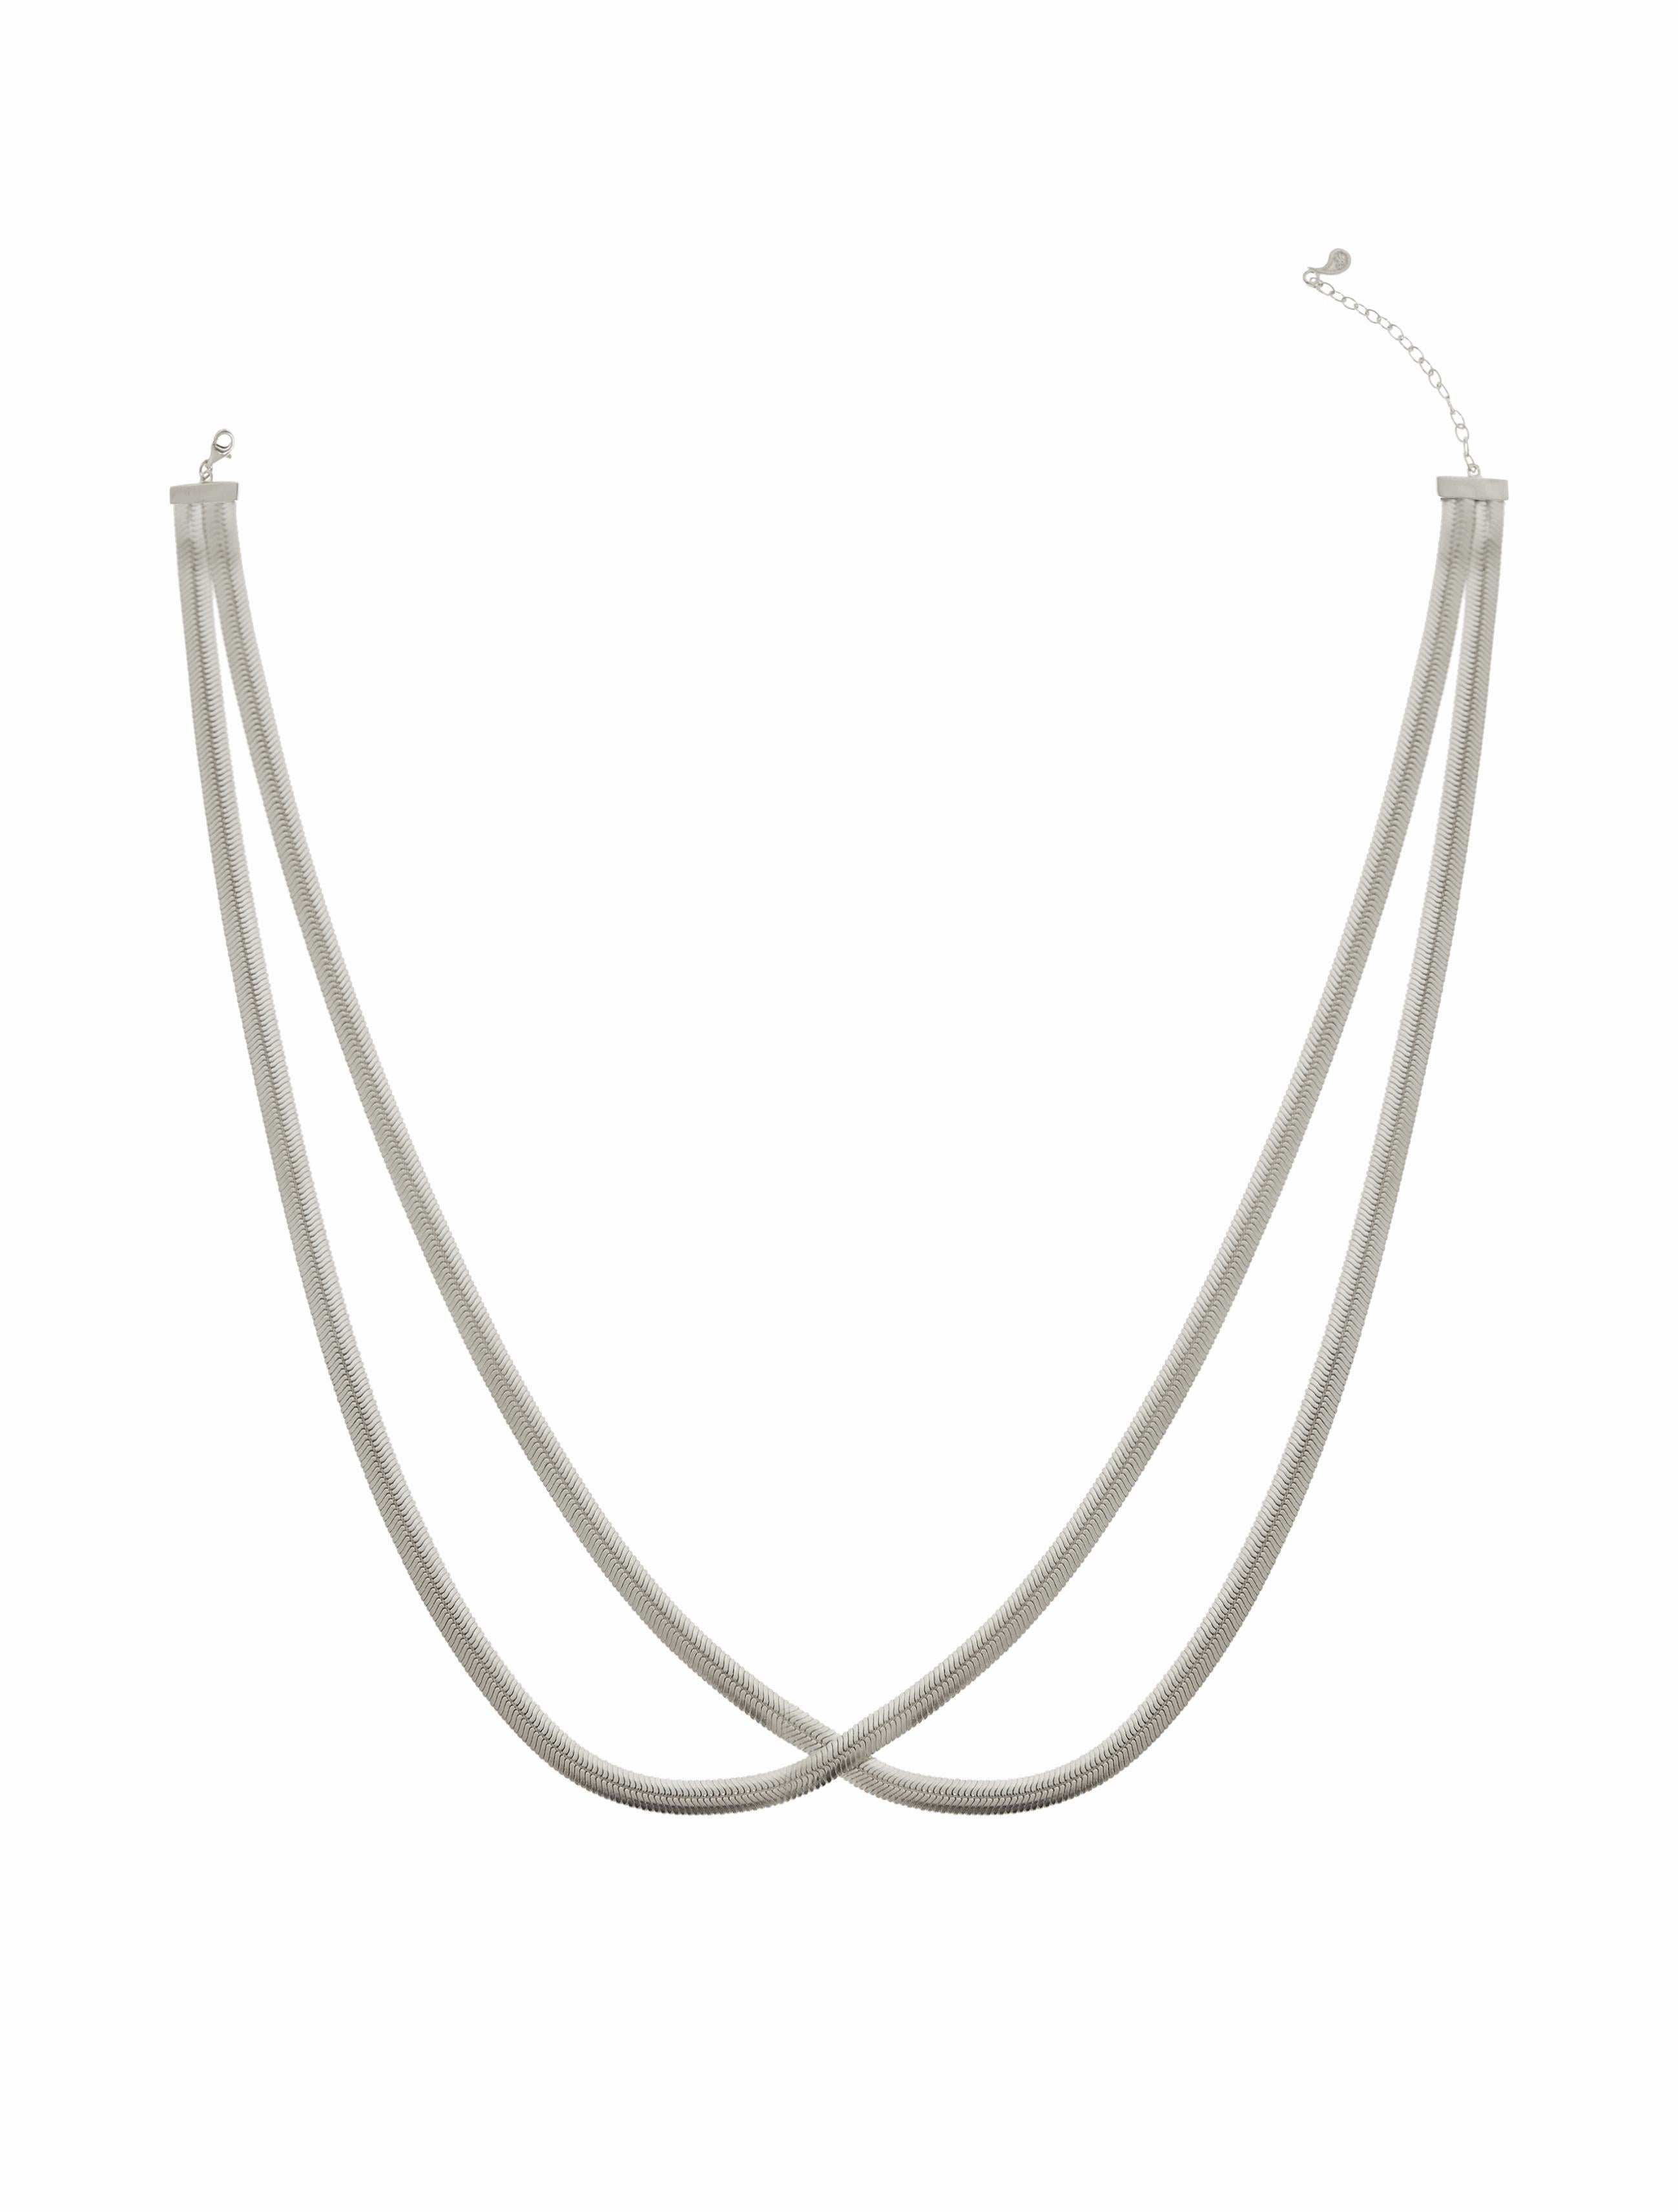 Necklace Collar Minimal Snake Chain 18 Karat Gold-Plated Silver Greek In New Condition For Sale In Athens, GR